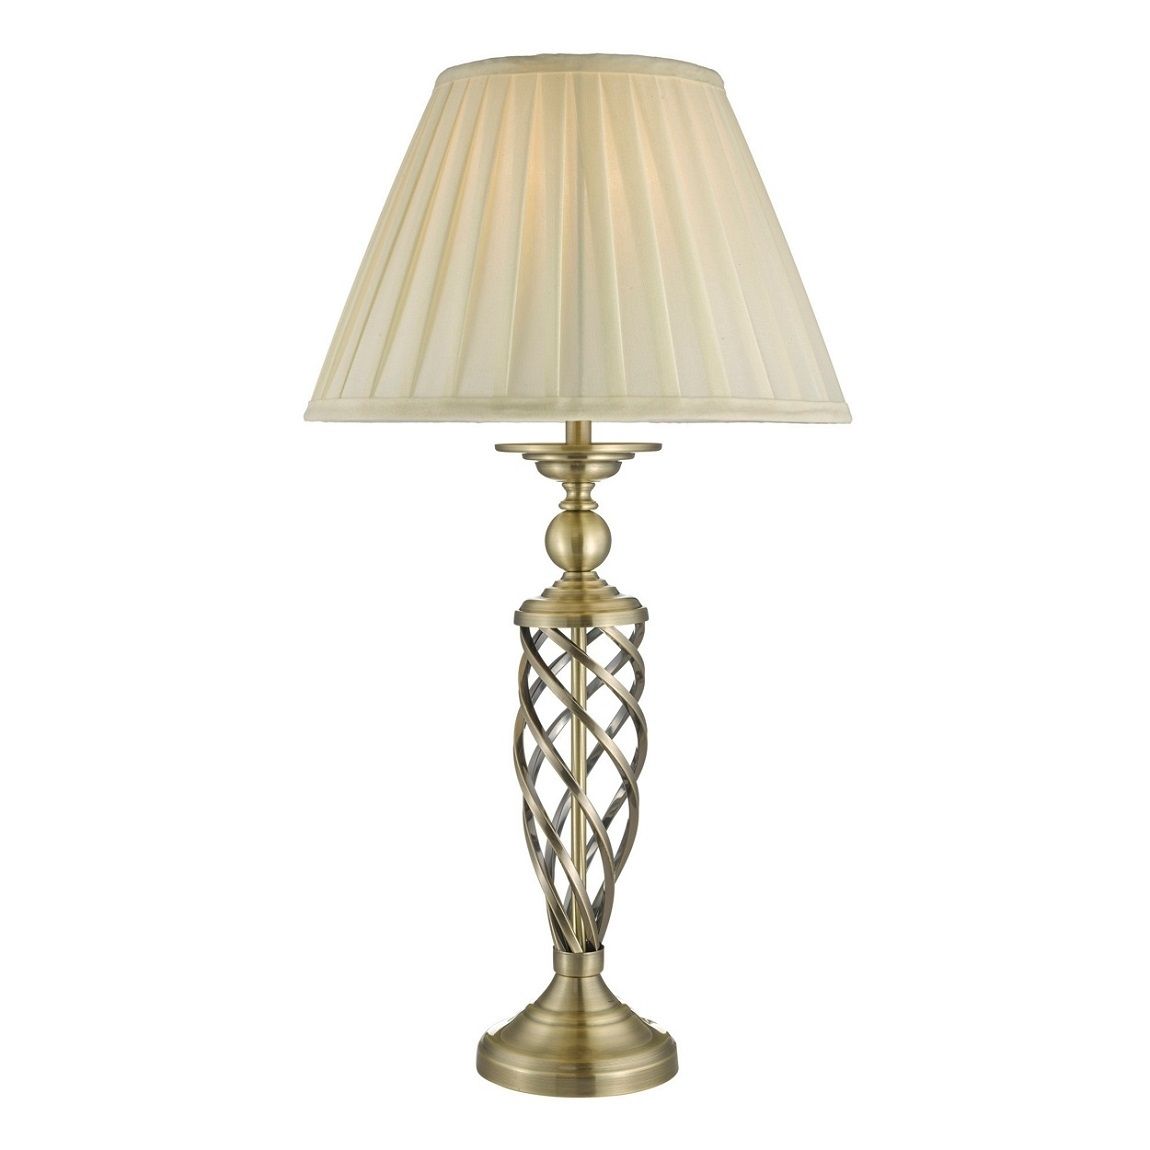 Debenhams Home Collection Jayce Table Light Desk Lamp Antique Brass Throughout Debenhams Table Lamps For Living Room (View 15 of 15)